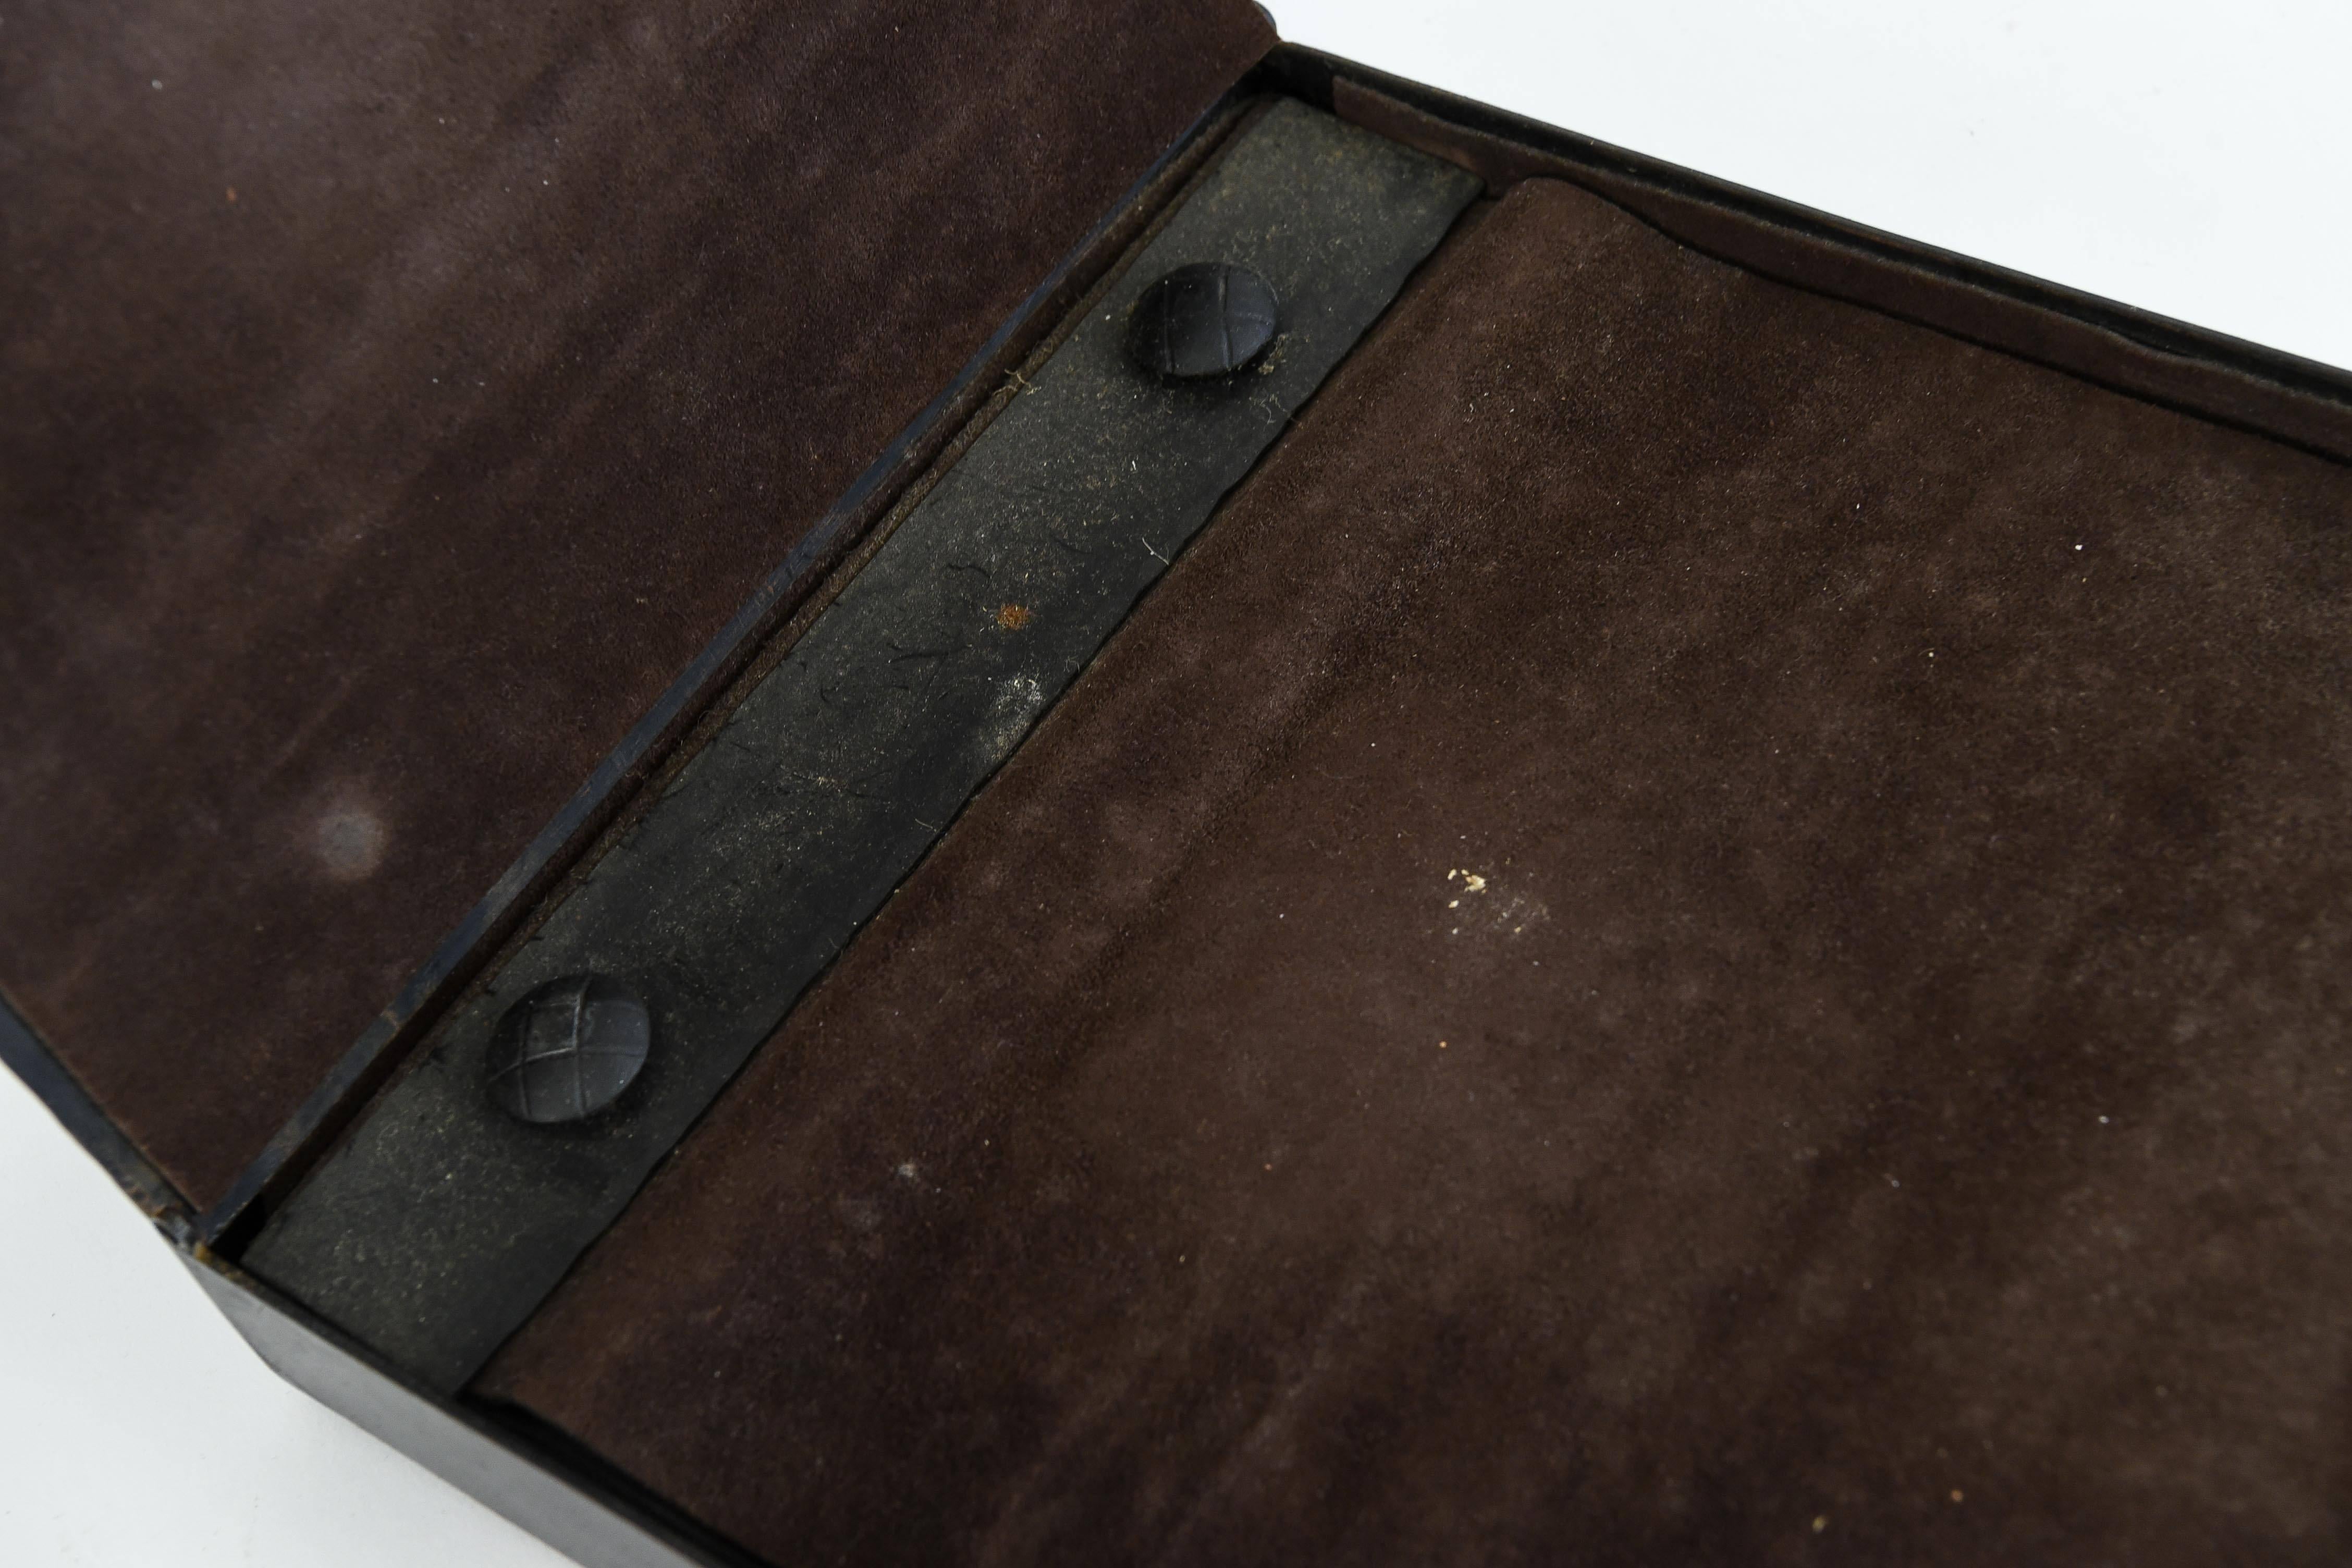 Mid-20th Century Czechoslovakian Hammered Copper and Steel Photo Album